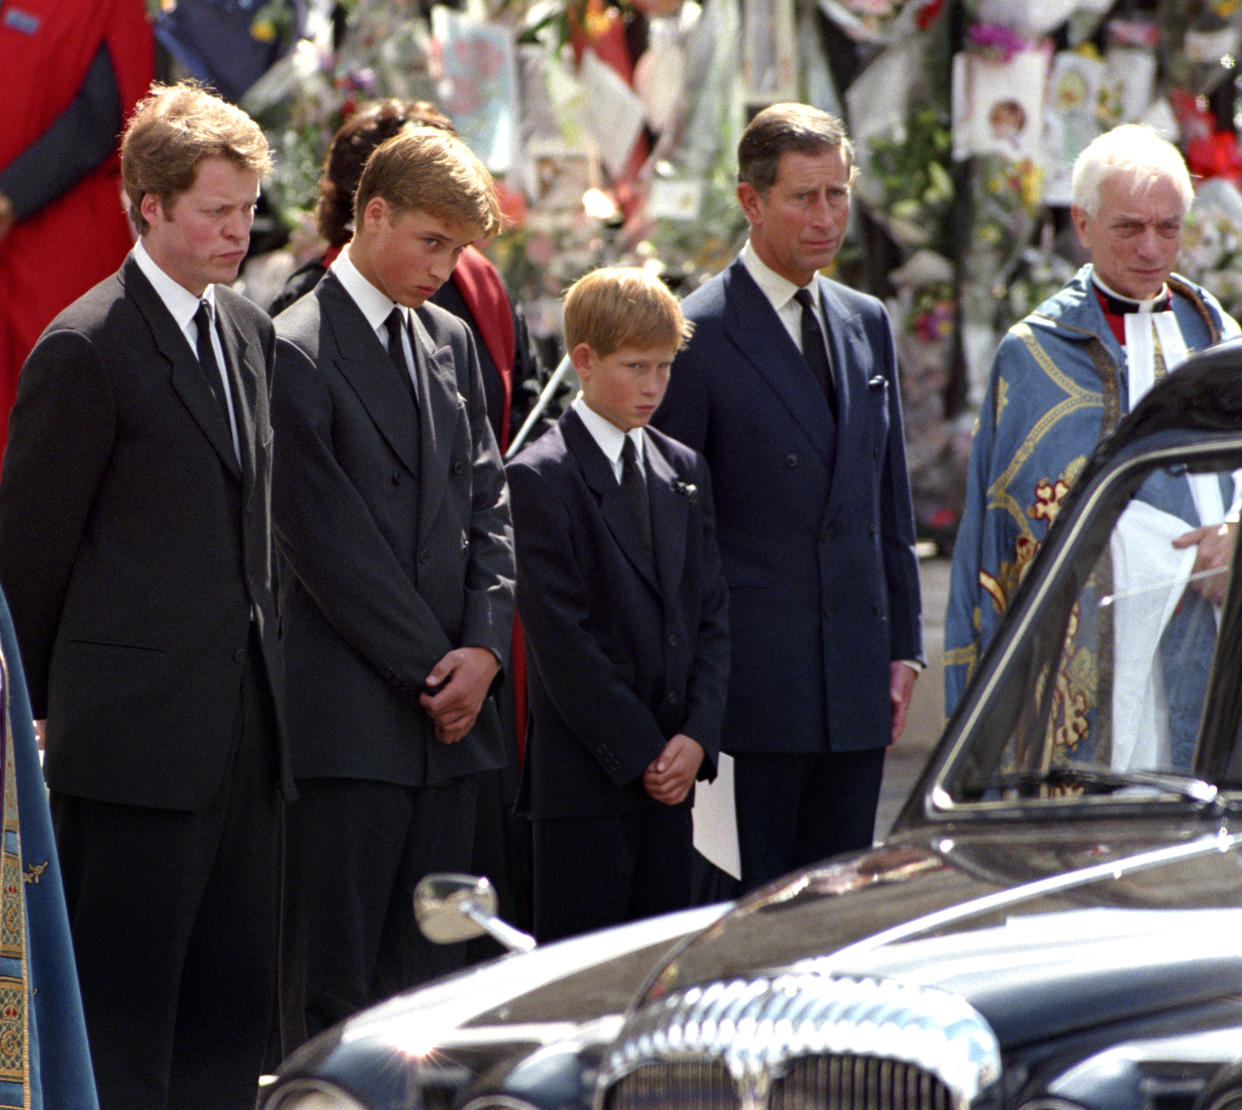 PA News photo dated September 1997. Pictured: The Earl Spencer, Prince William, Prince Harry and The Prince of Wales wait as the hearse carrying the coffin of Diana, Princess of Wales prepares to leave Westminster Abbey following her funeral service. PA Feature SHOWBIZ Film Reviews. Picture credit should read: PA Archive/PA Images/Fiona Hanson. All Rights Reserved. WARNING: This picture must only be used to accompany PA Feature SHOWBIZ Film Reviews. (Photo by PA Images via Getty Images)